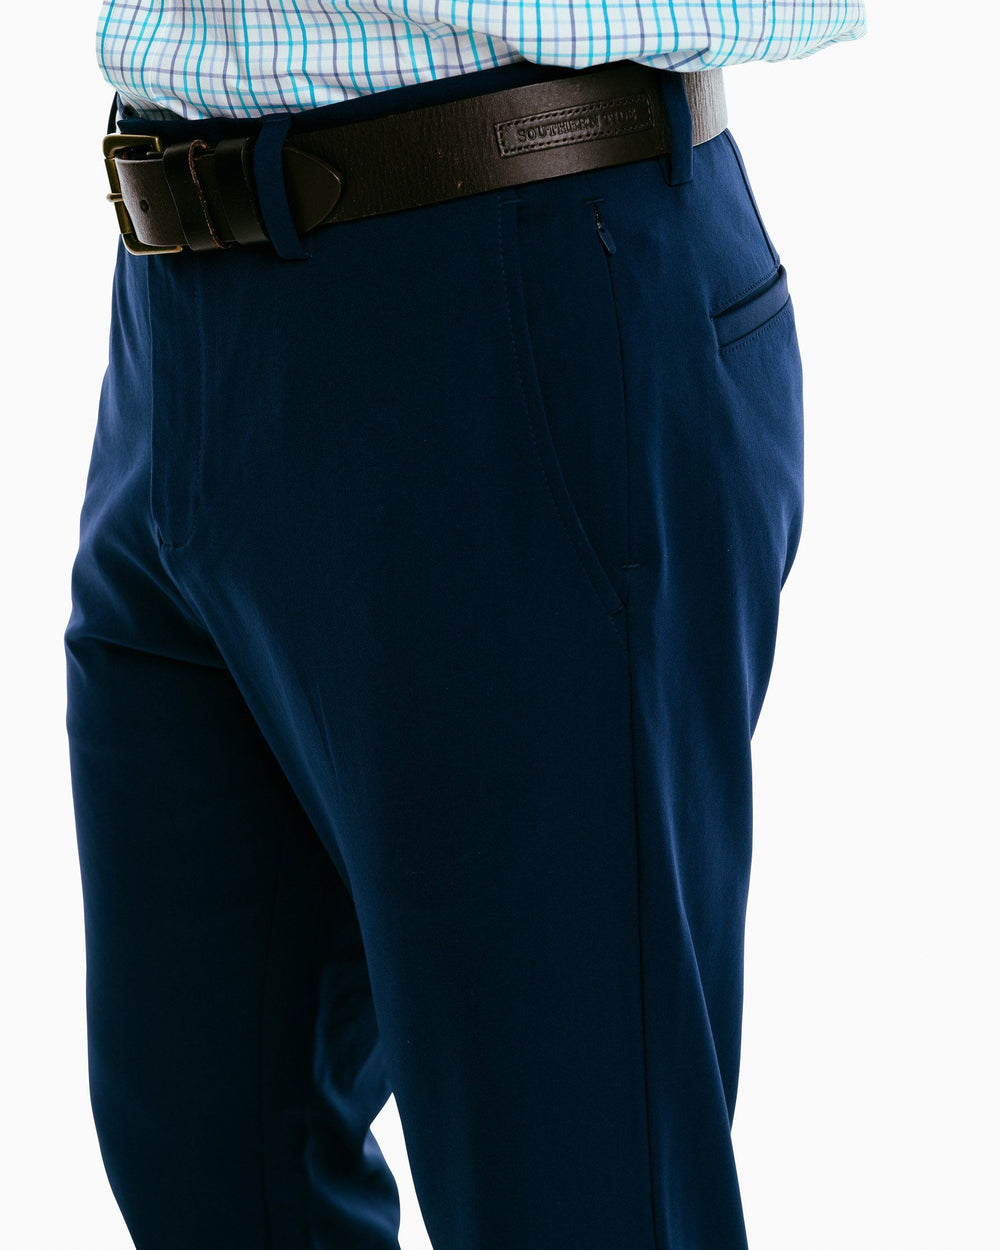 The side view of the Men's Jack Performance Pant by Southern Tide - True Navy